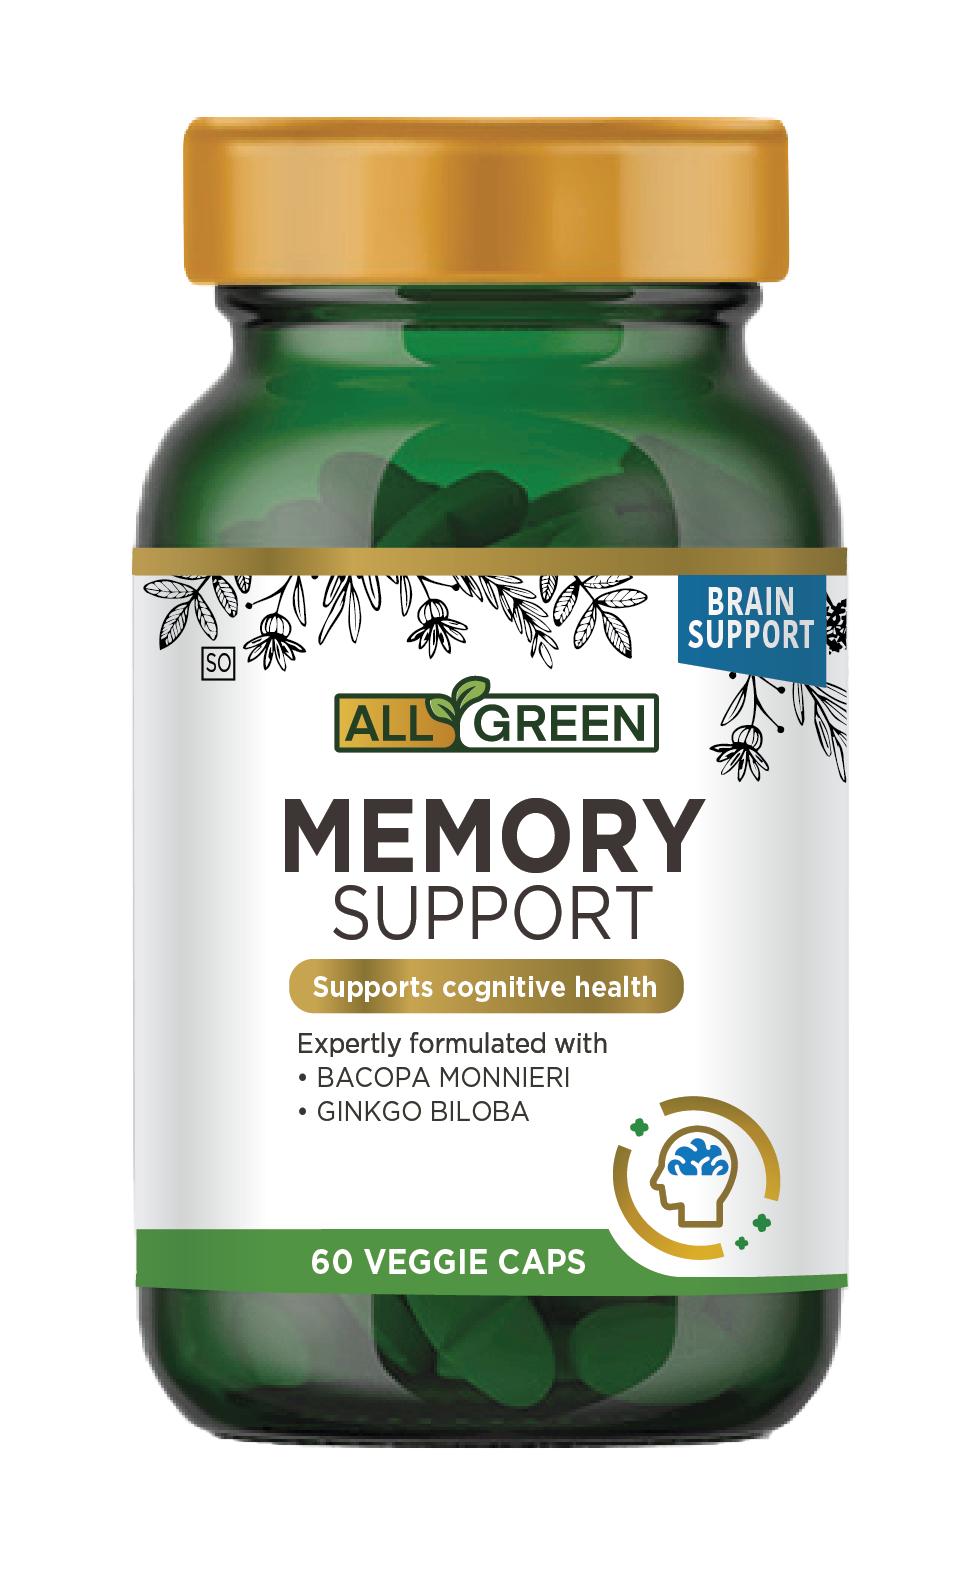 Memory Support